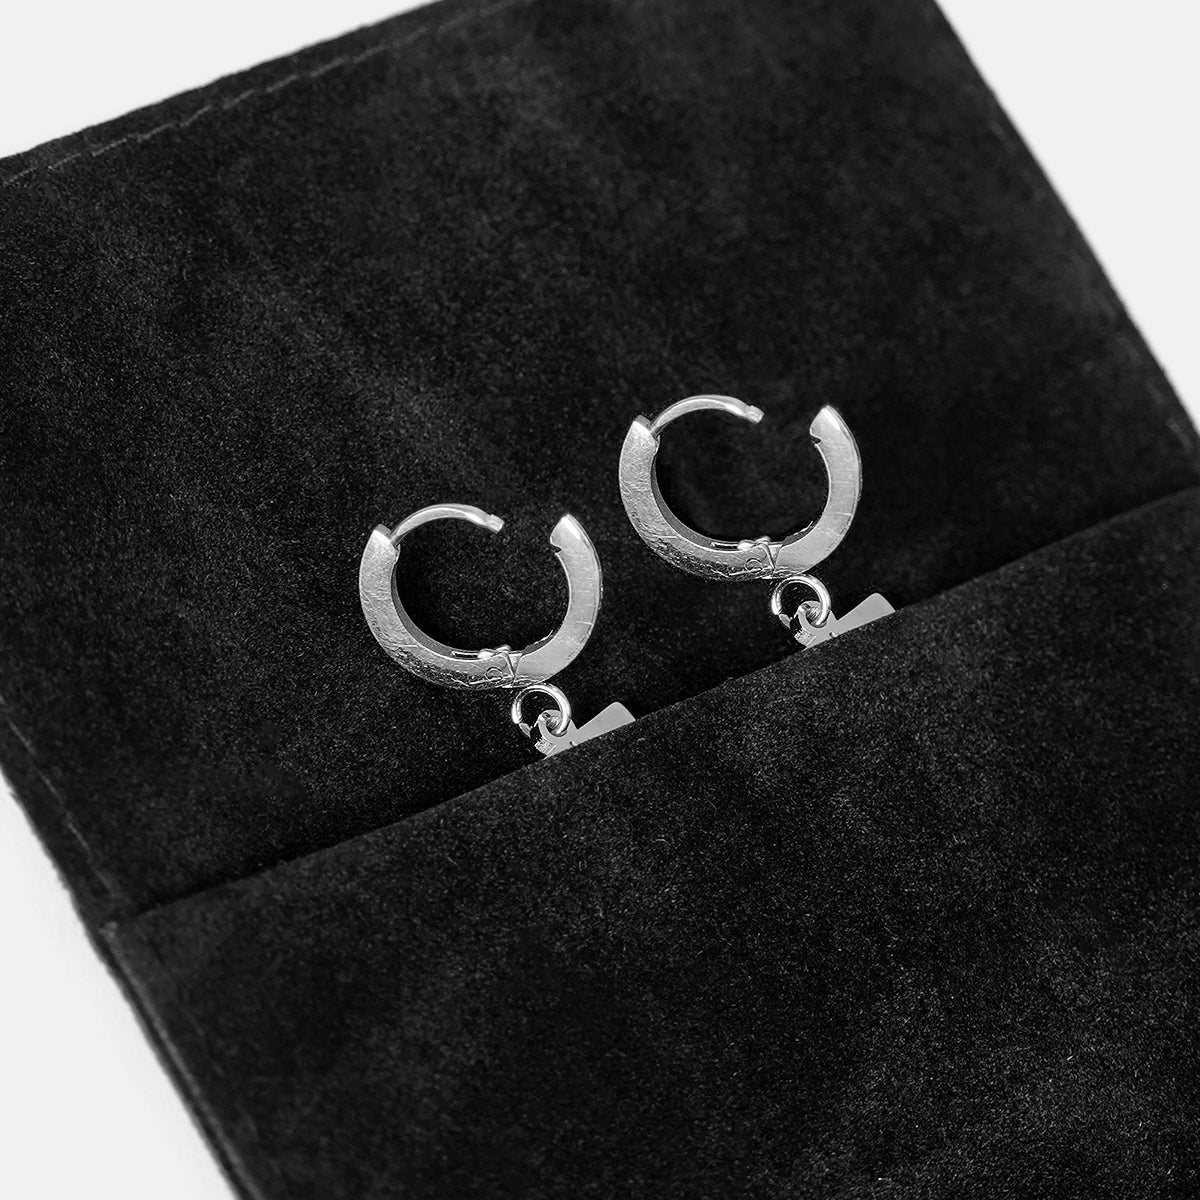 52 Number Earring - Stainless Steel